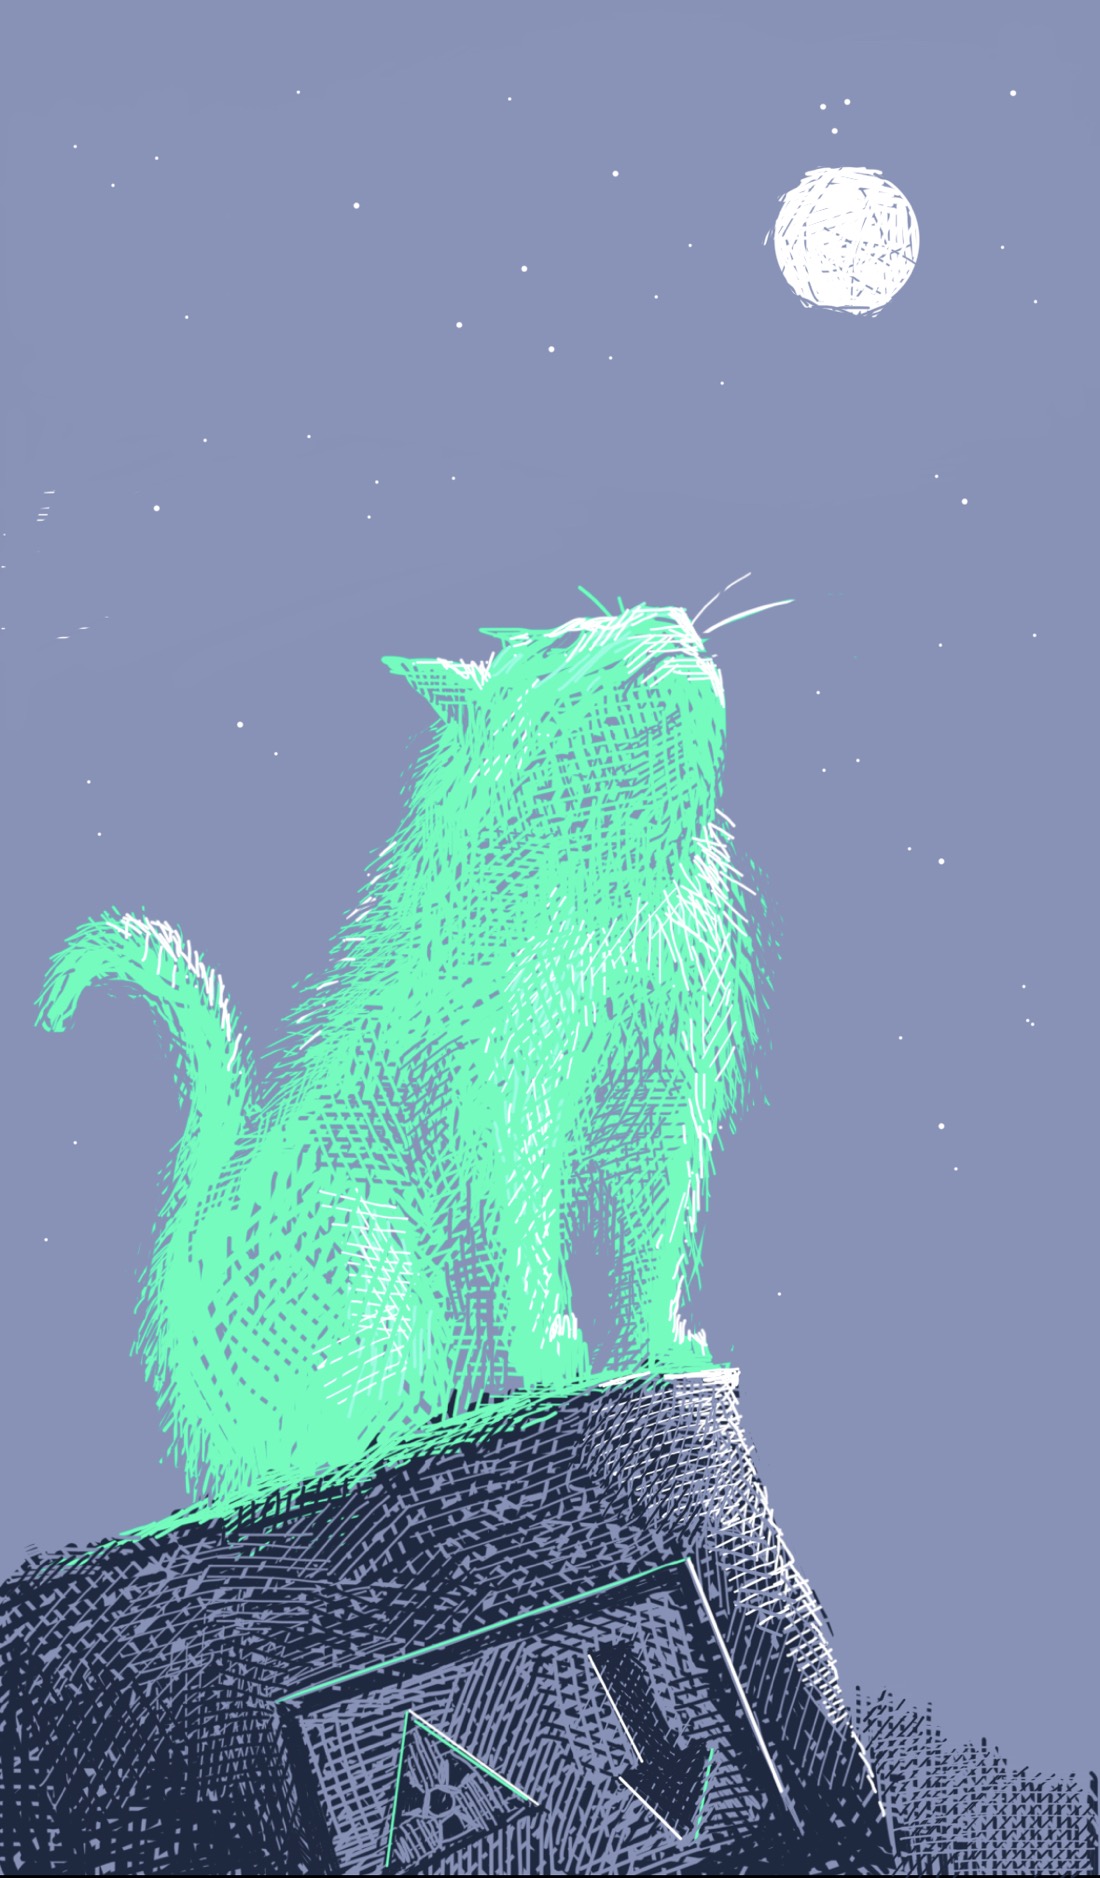 A phosphorescent-green cat sits on a rocky promontory under a clear starry night, face turned towards the sky. The object the cat is sitting on has a metal plate with a symbol indicating a radioactive hazard, and an arrow pointing down.